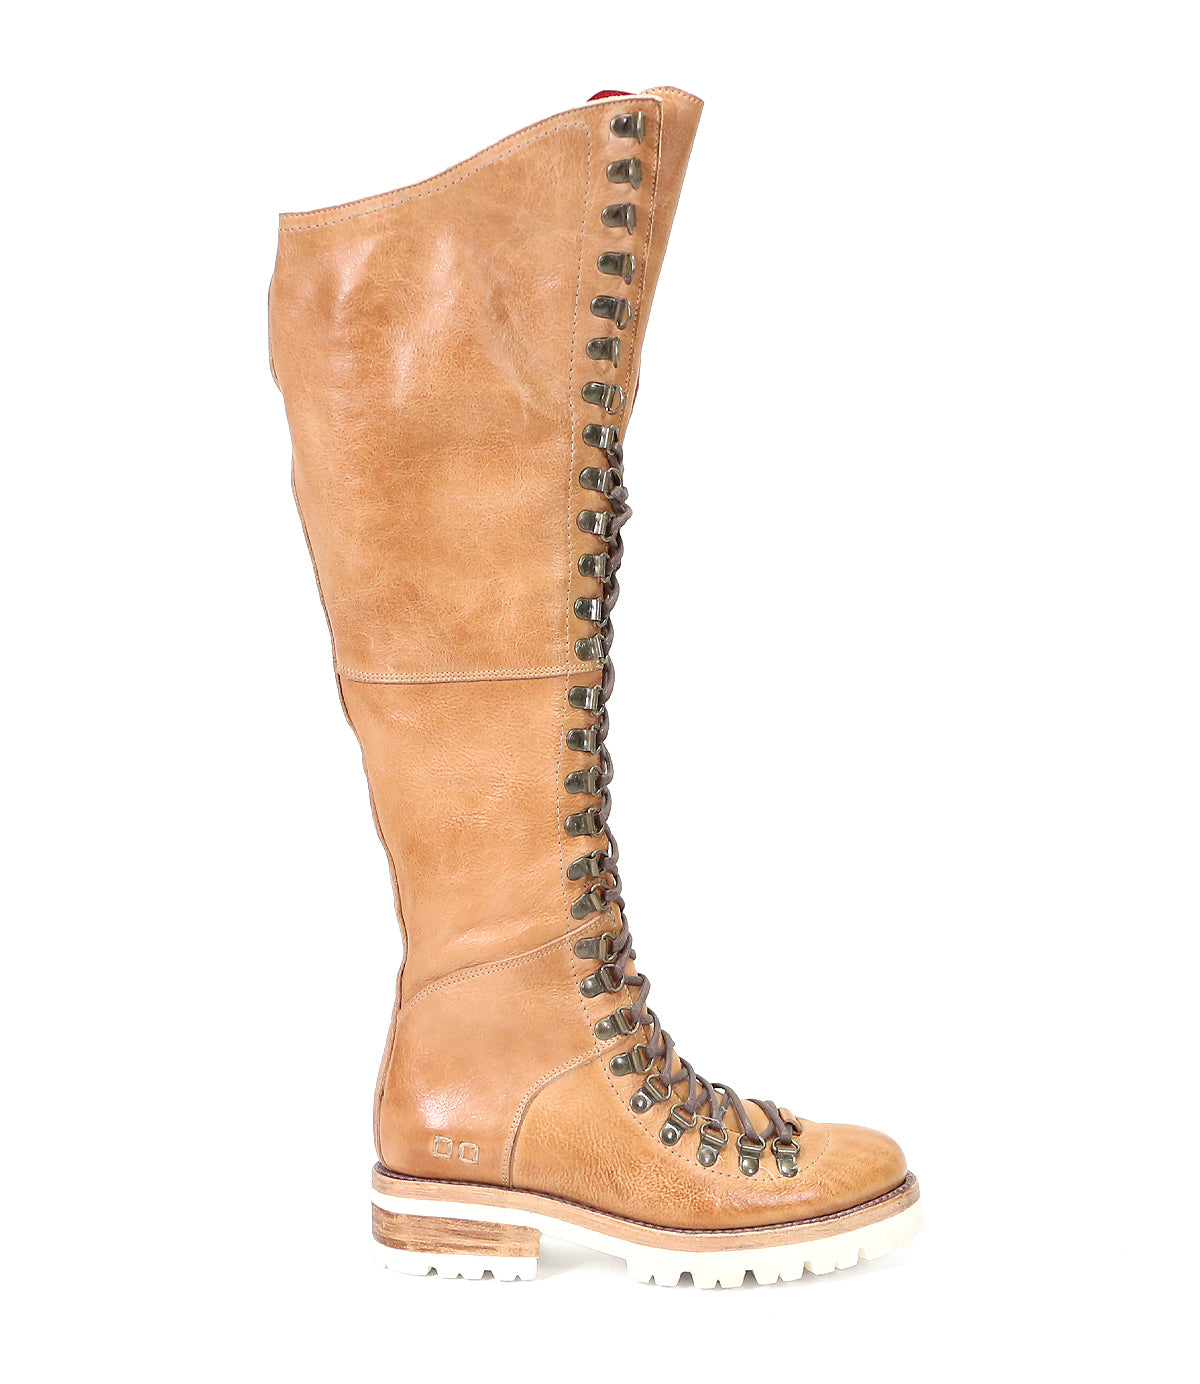 Brown leather knee-high, hiker-style boot with lace-up front and rugged sole, isolated on white background by Bed Stu's Lustrous boot.